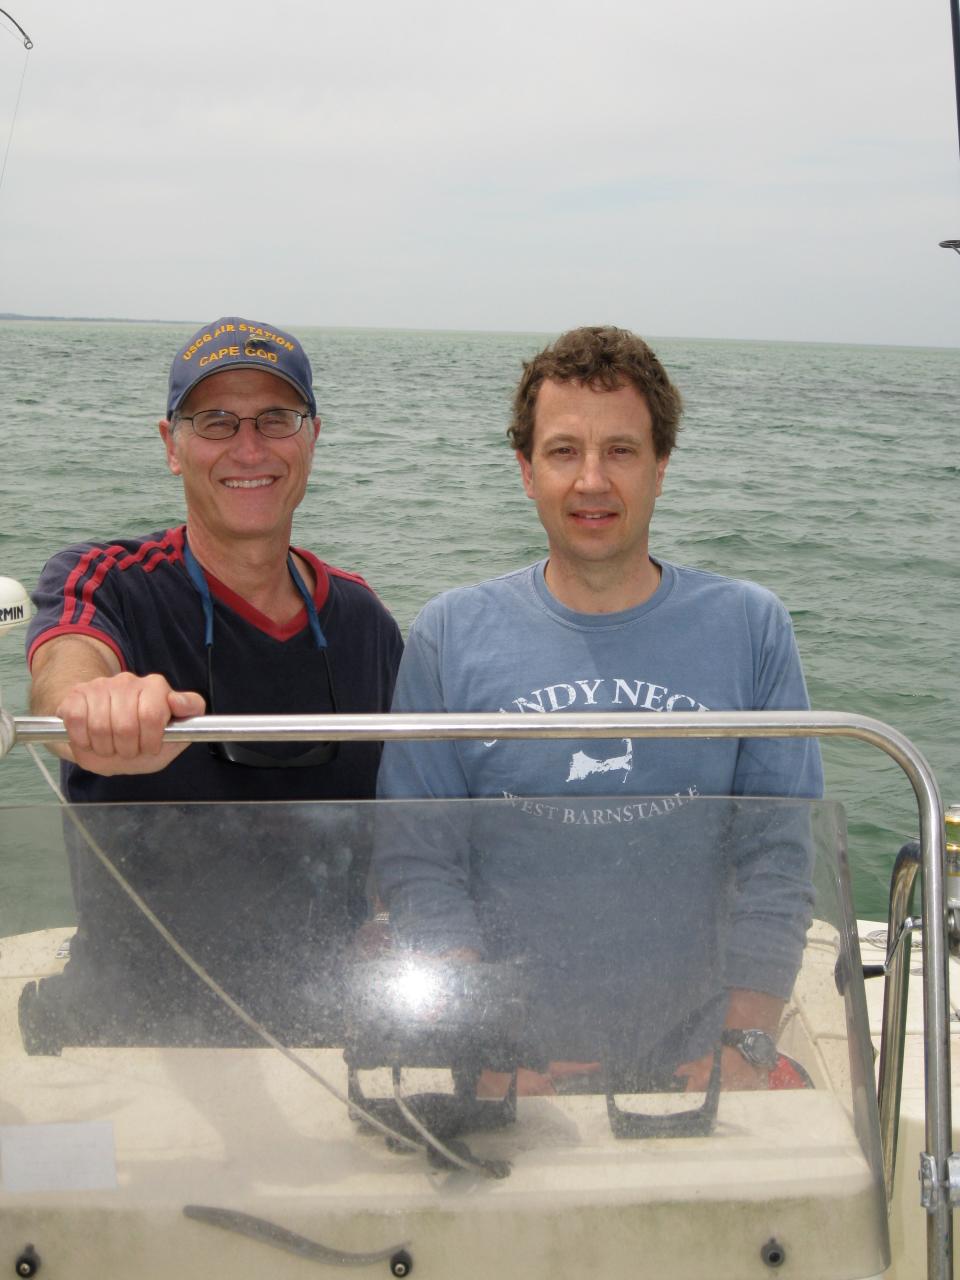 Michael Tougias, left, and Adam Gamble, authors of "The Power of Positive Fishing" and the friendship that grew over many trips on the Scout recreational fishing boat.